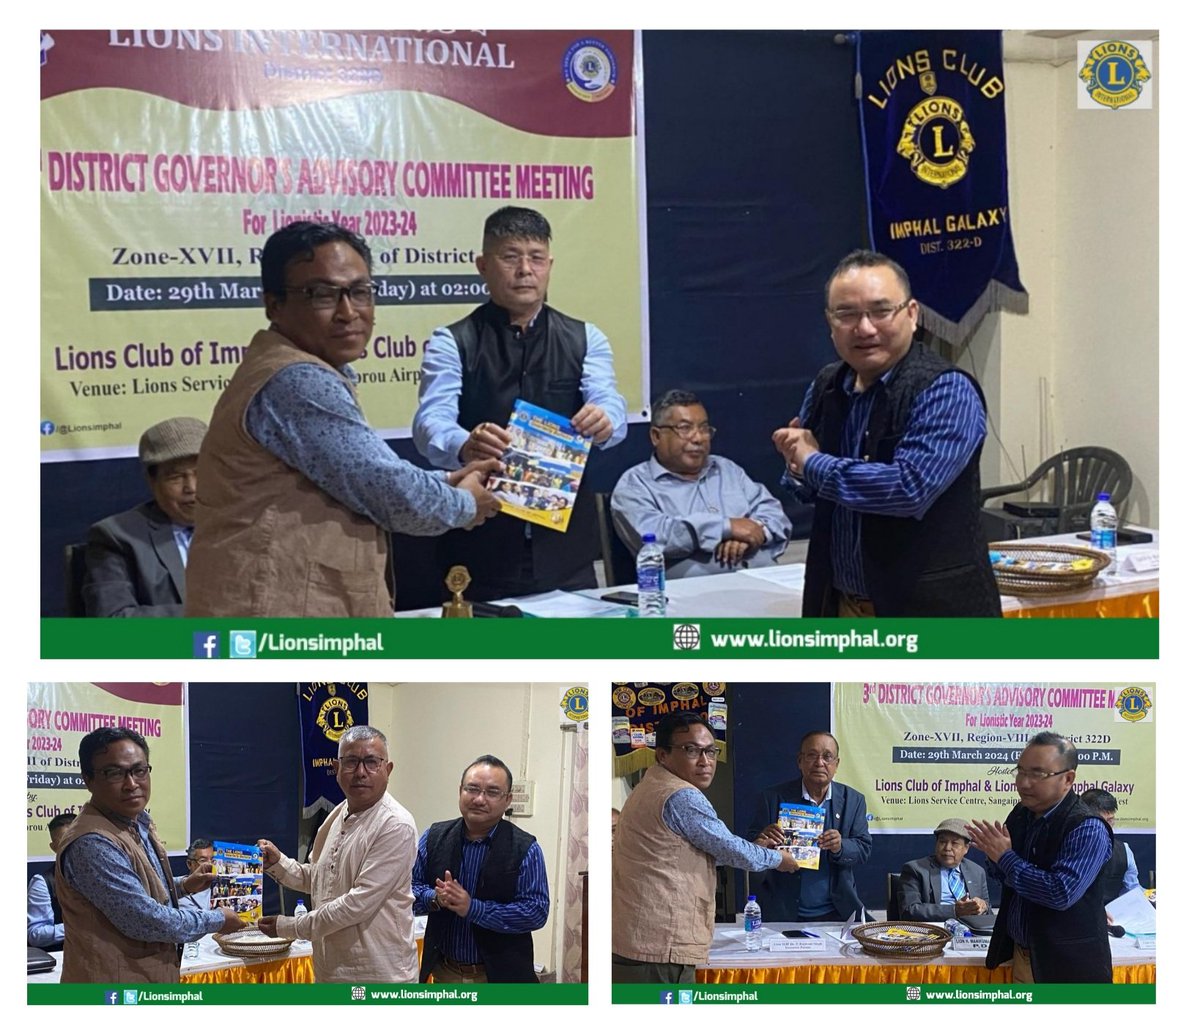 #LionsClubofImphal presented copies of 2nd Club Quarterlt Bulletin to ZC, resourceperson & presidents of other Clubs during the 3rd DG Advisory Committee Meeting.
#LionsClubofImphal #Dist322D #lionsinternational @lionsclubs